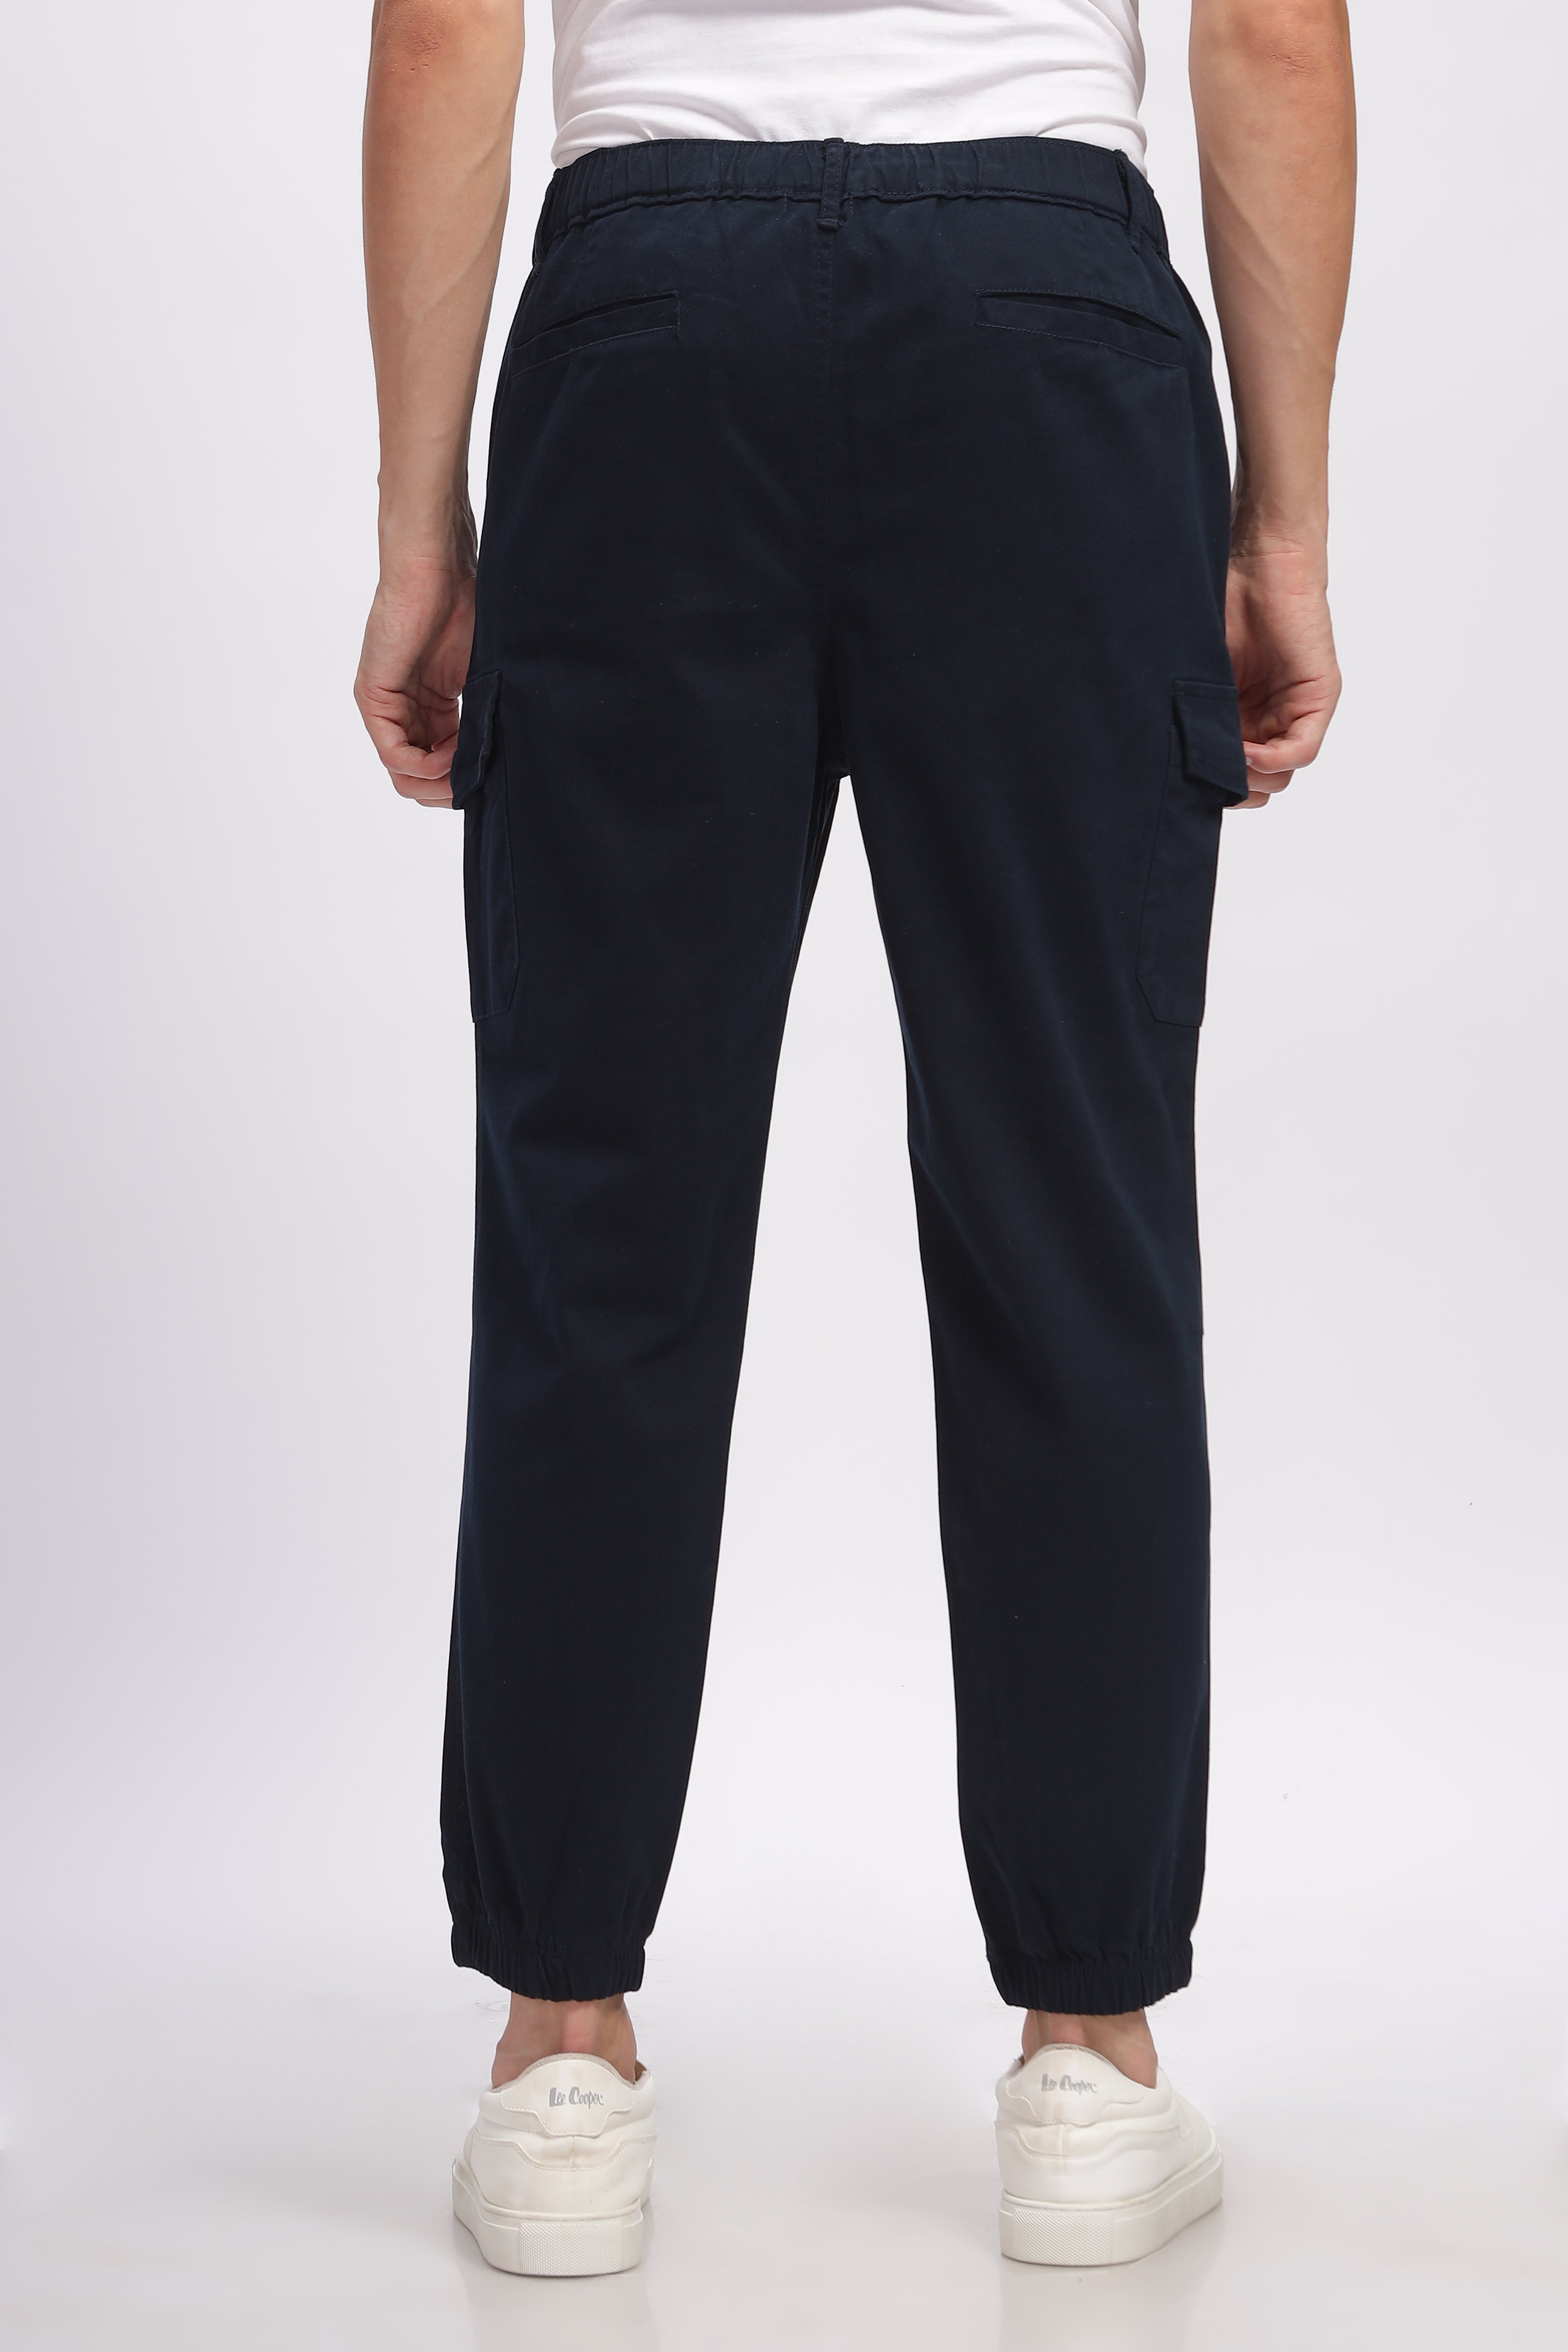 Male OPEN END Boys Track Pant at best price in Tiruppur | ID: 27633200888